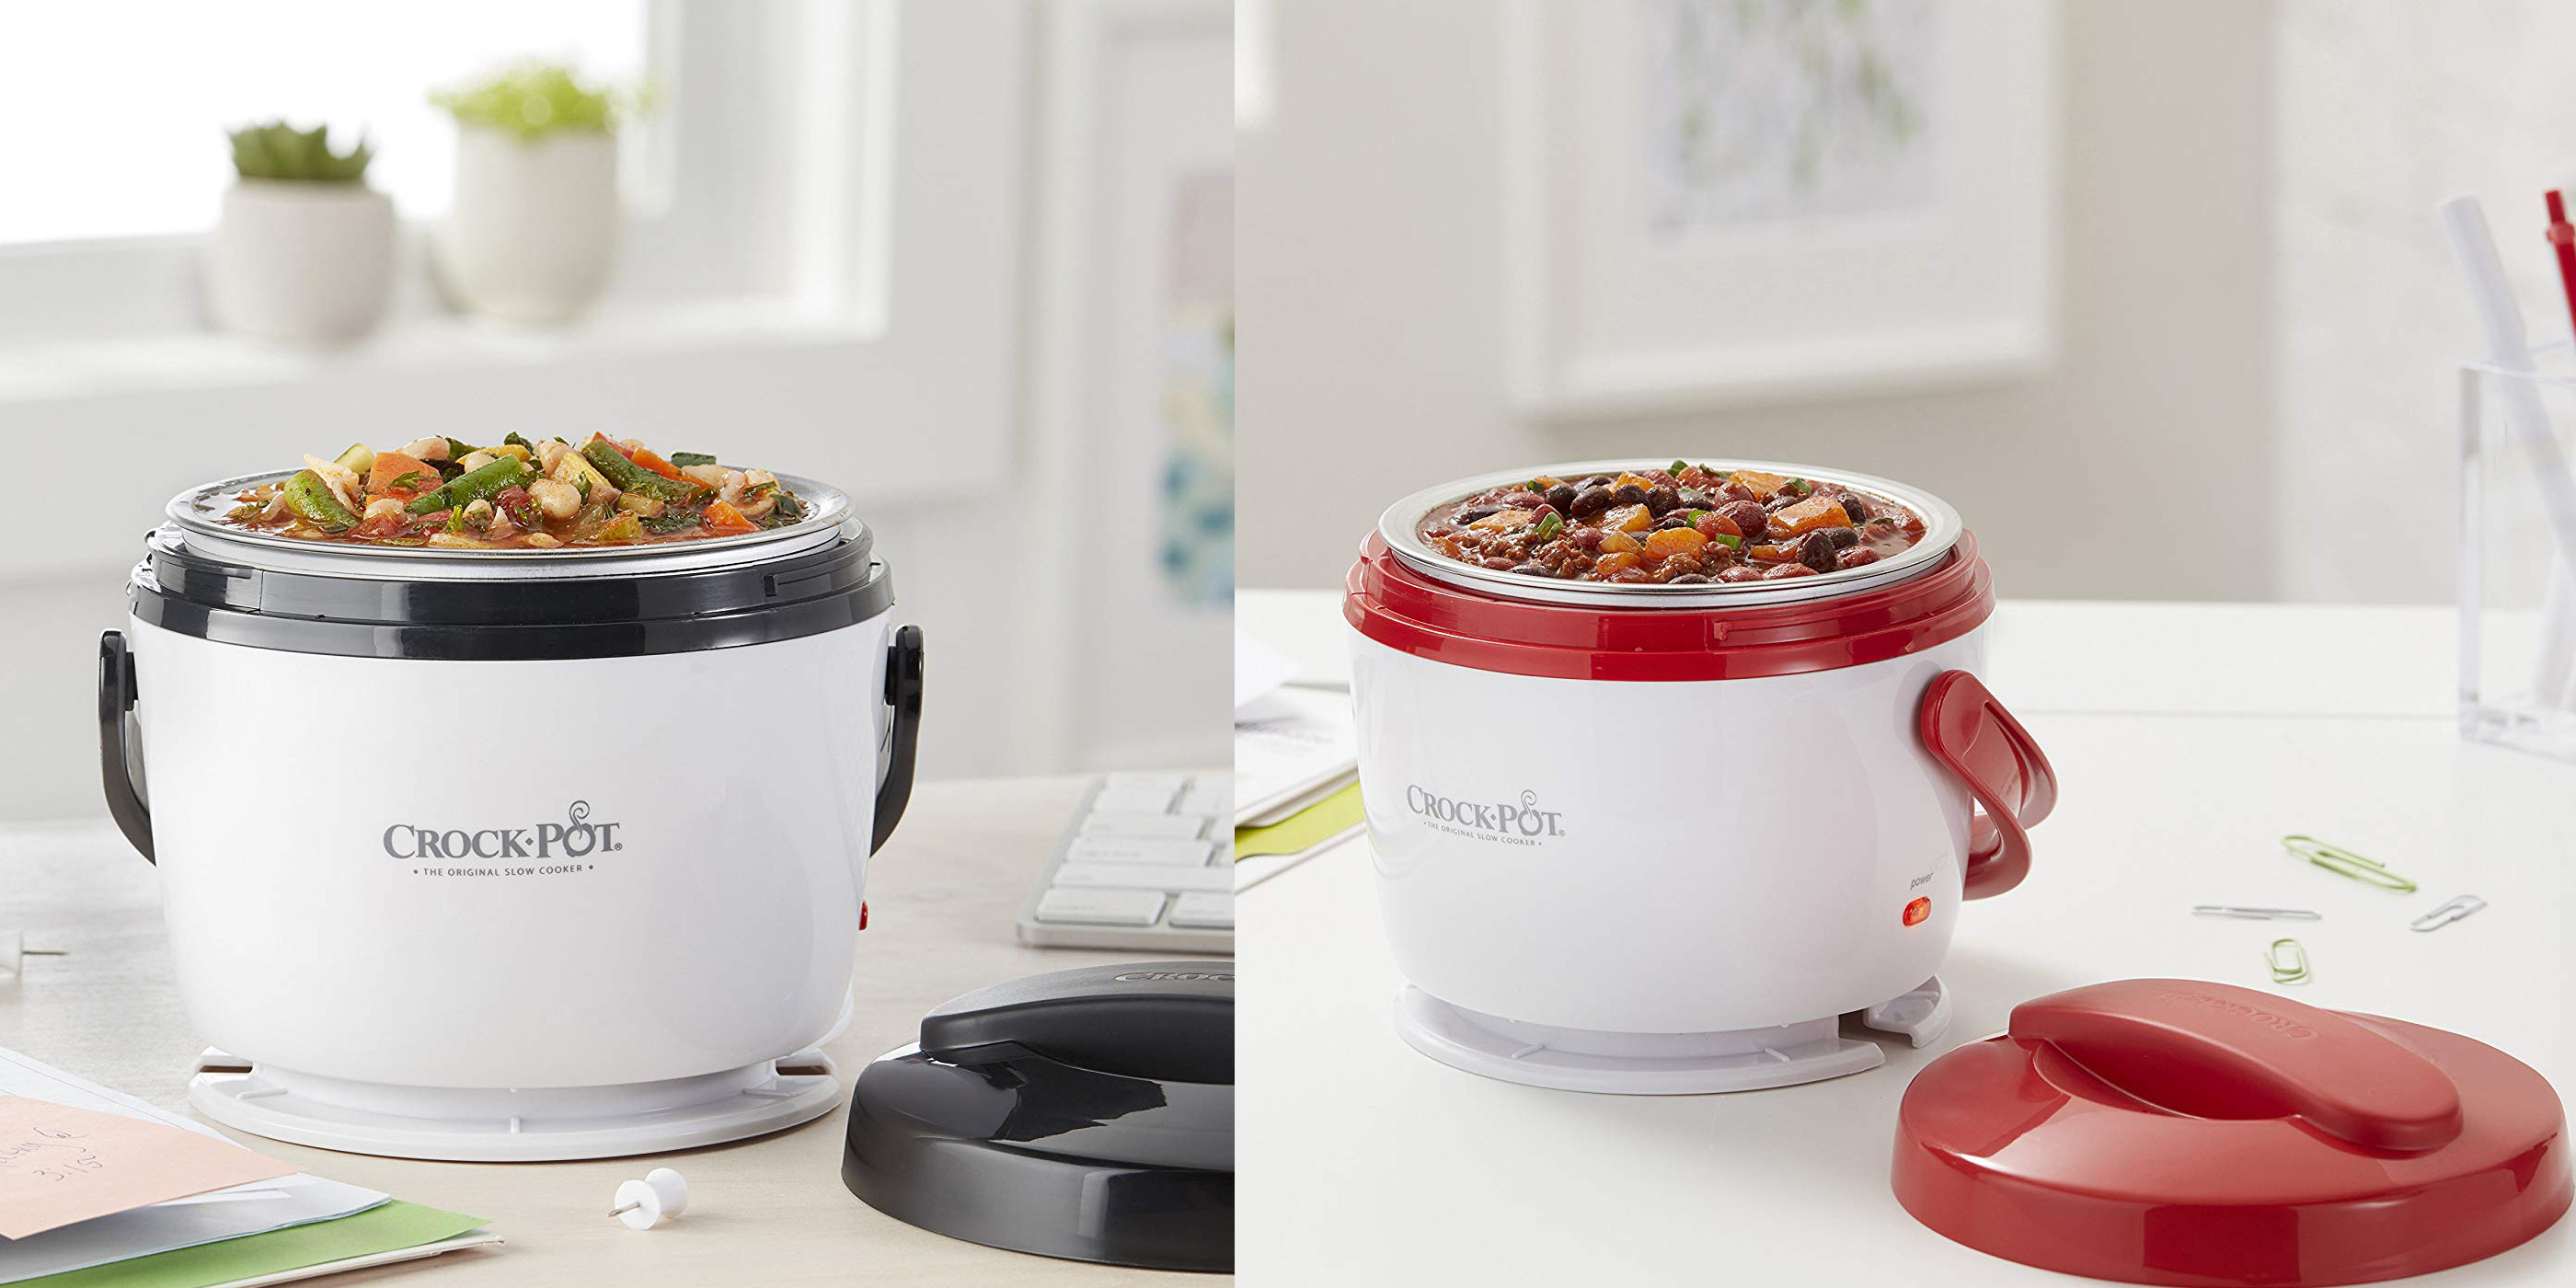 Here's a 3-pack of Crock-Pot Food Warmers at just $33 shipped ($60 ...